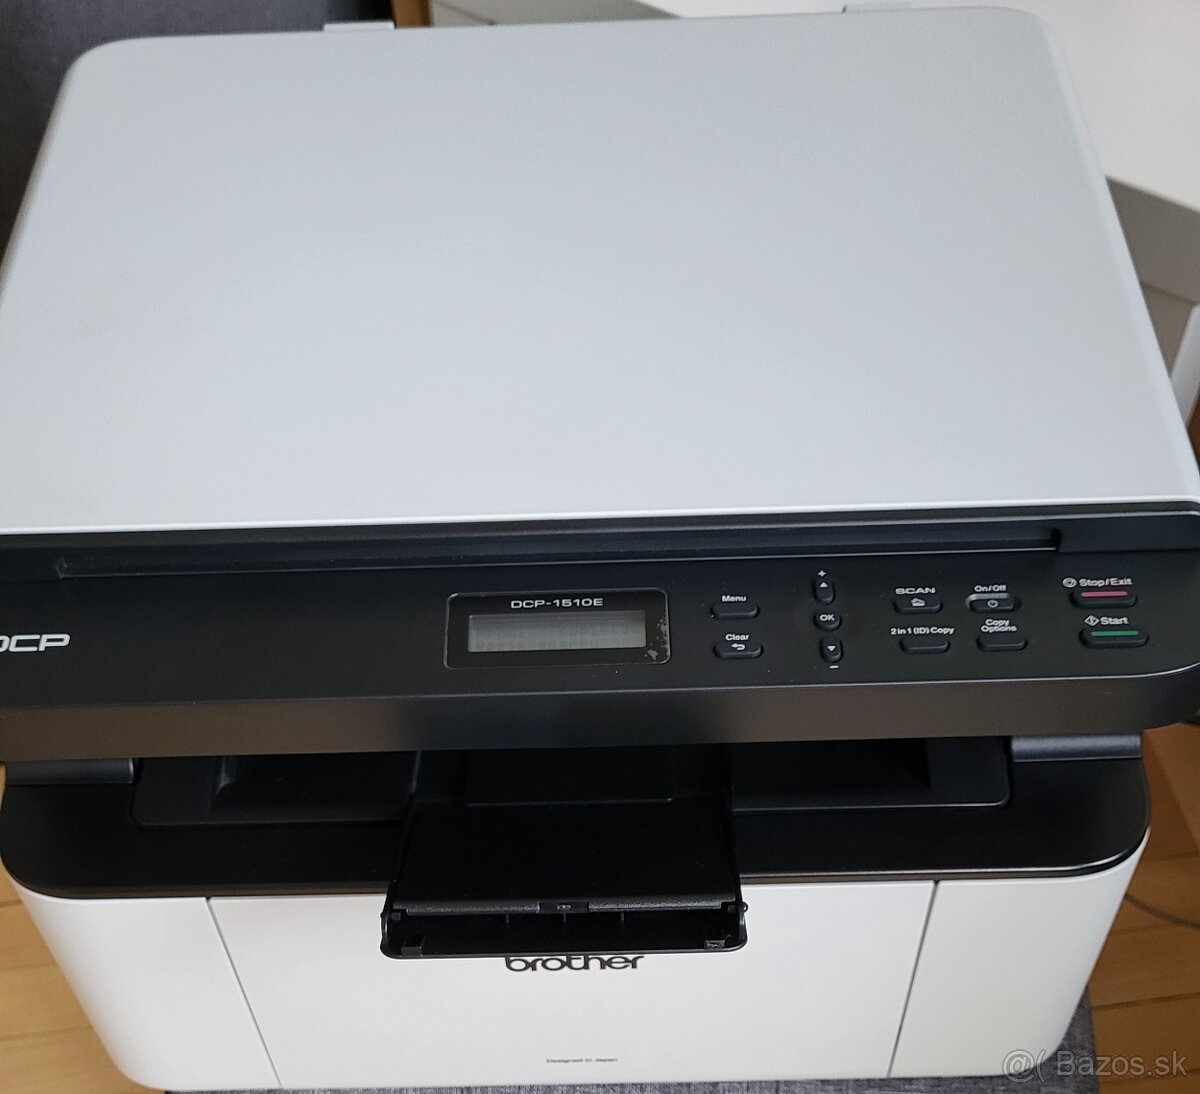 BROTHER DCP- 1510E